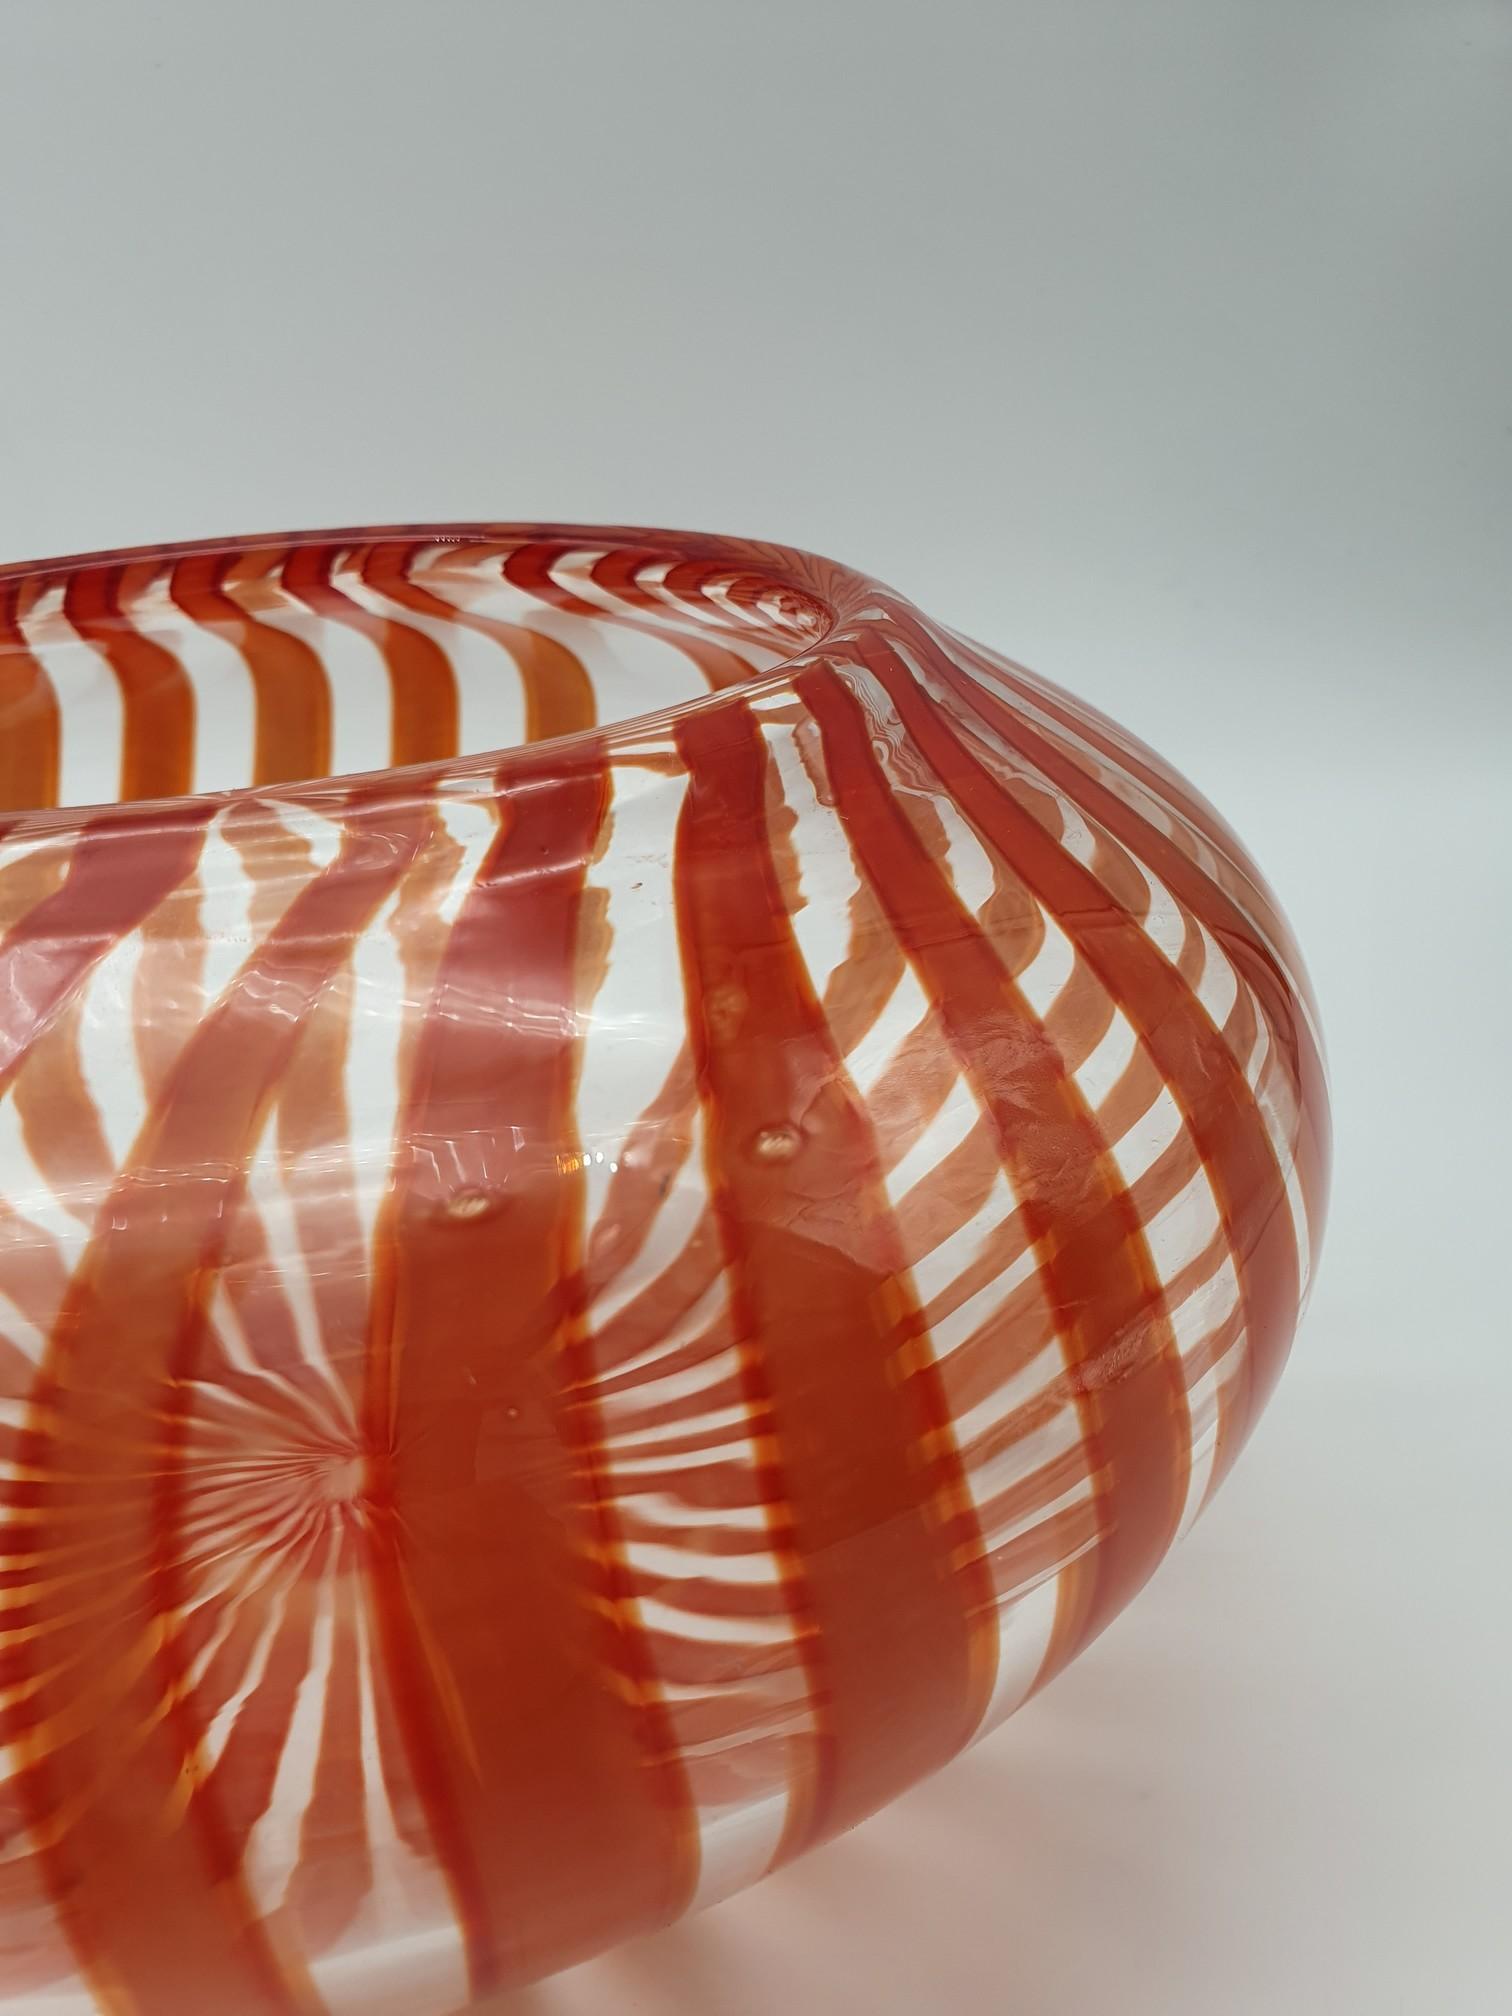 Late 20th Century Modern Murano Glass Bowl with Red Canes by Gino Cenedese, 1998 For Sale